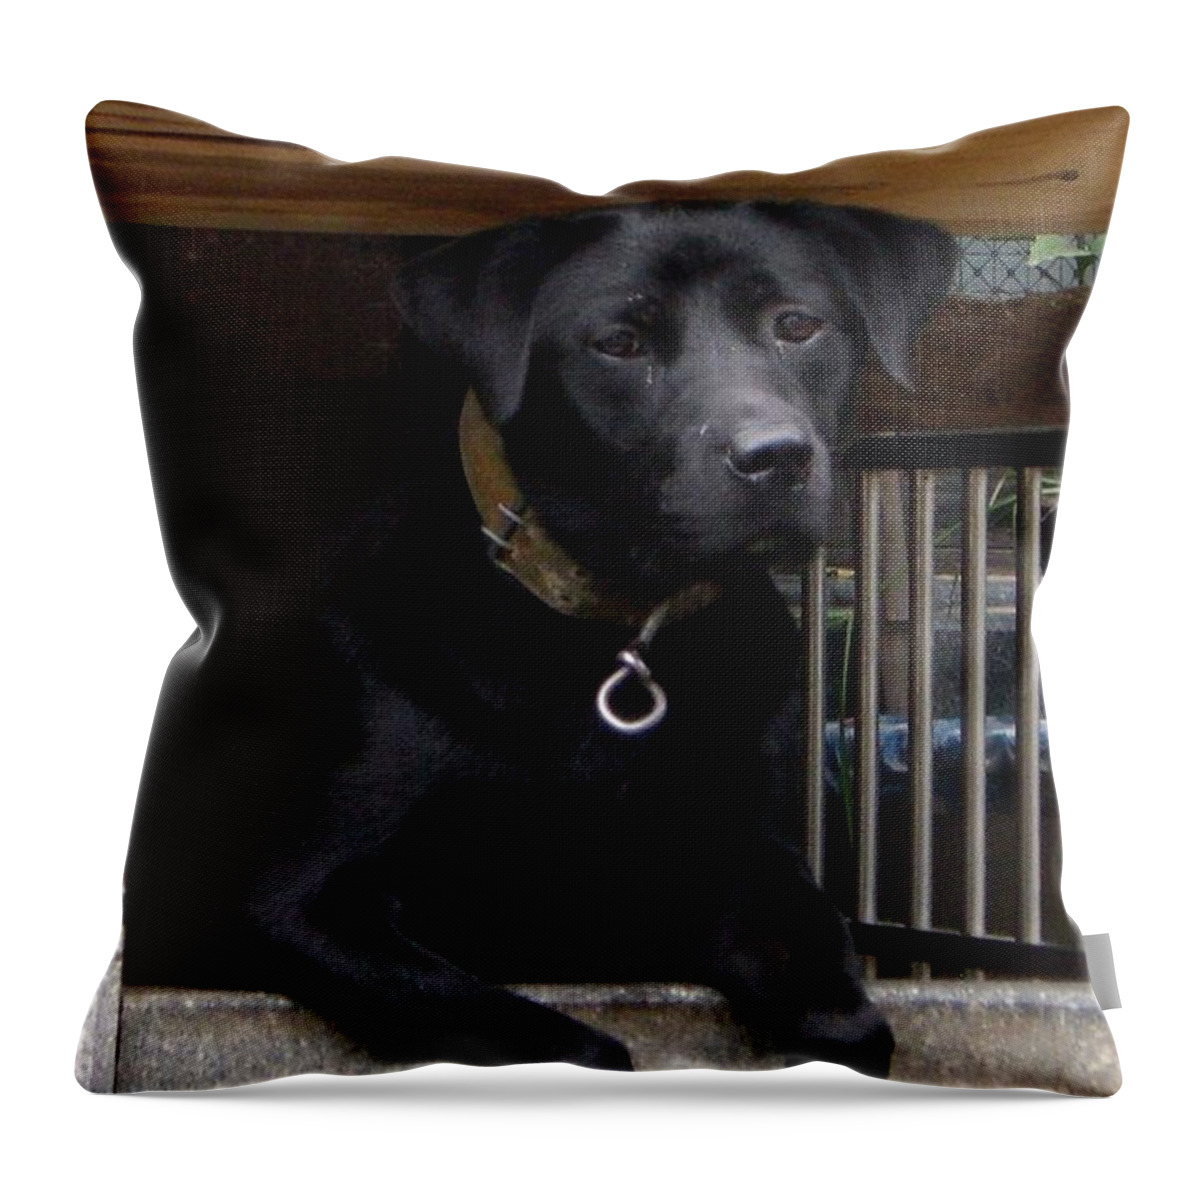 Dog Throw Pillow featuring the photograph Patience by Barbie Corbett-Newmin